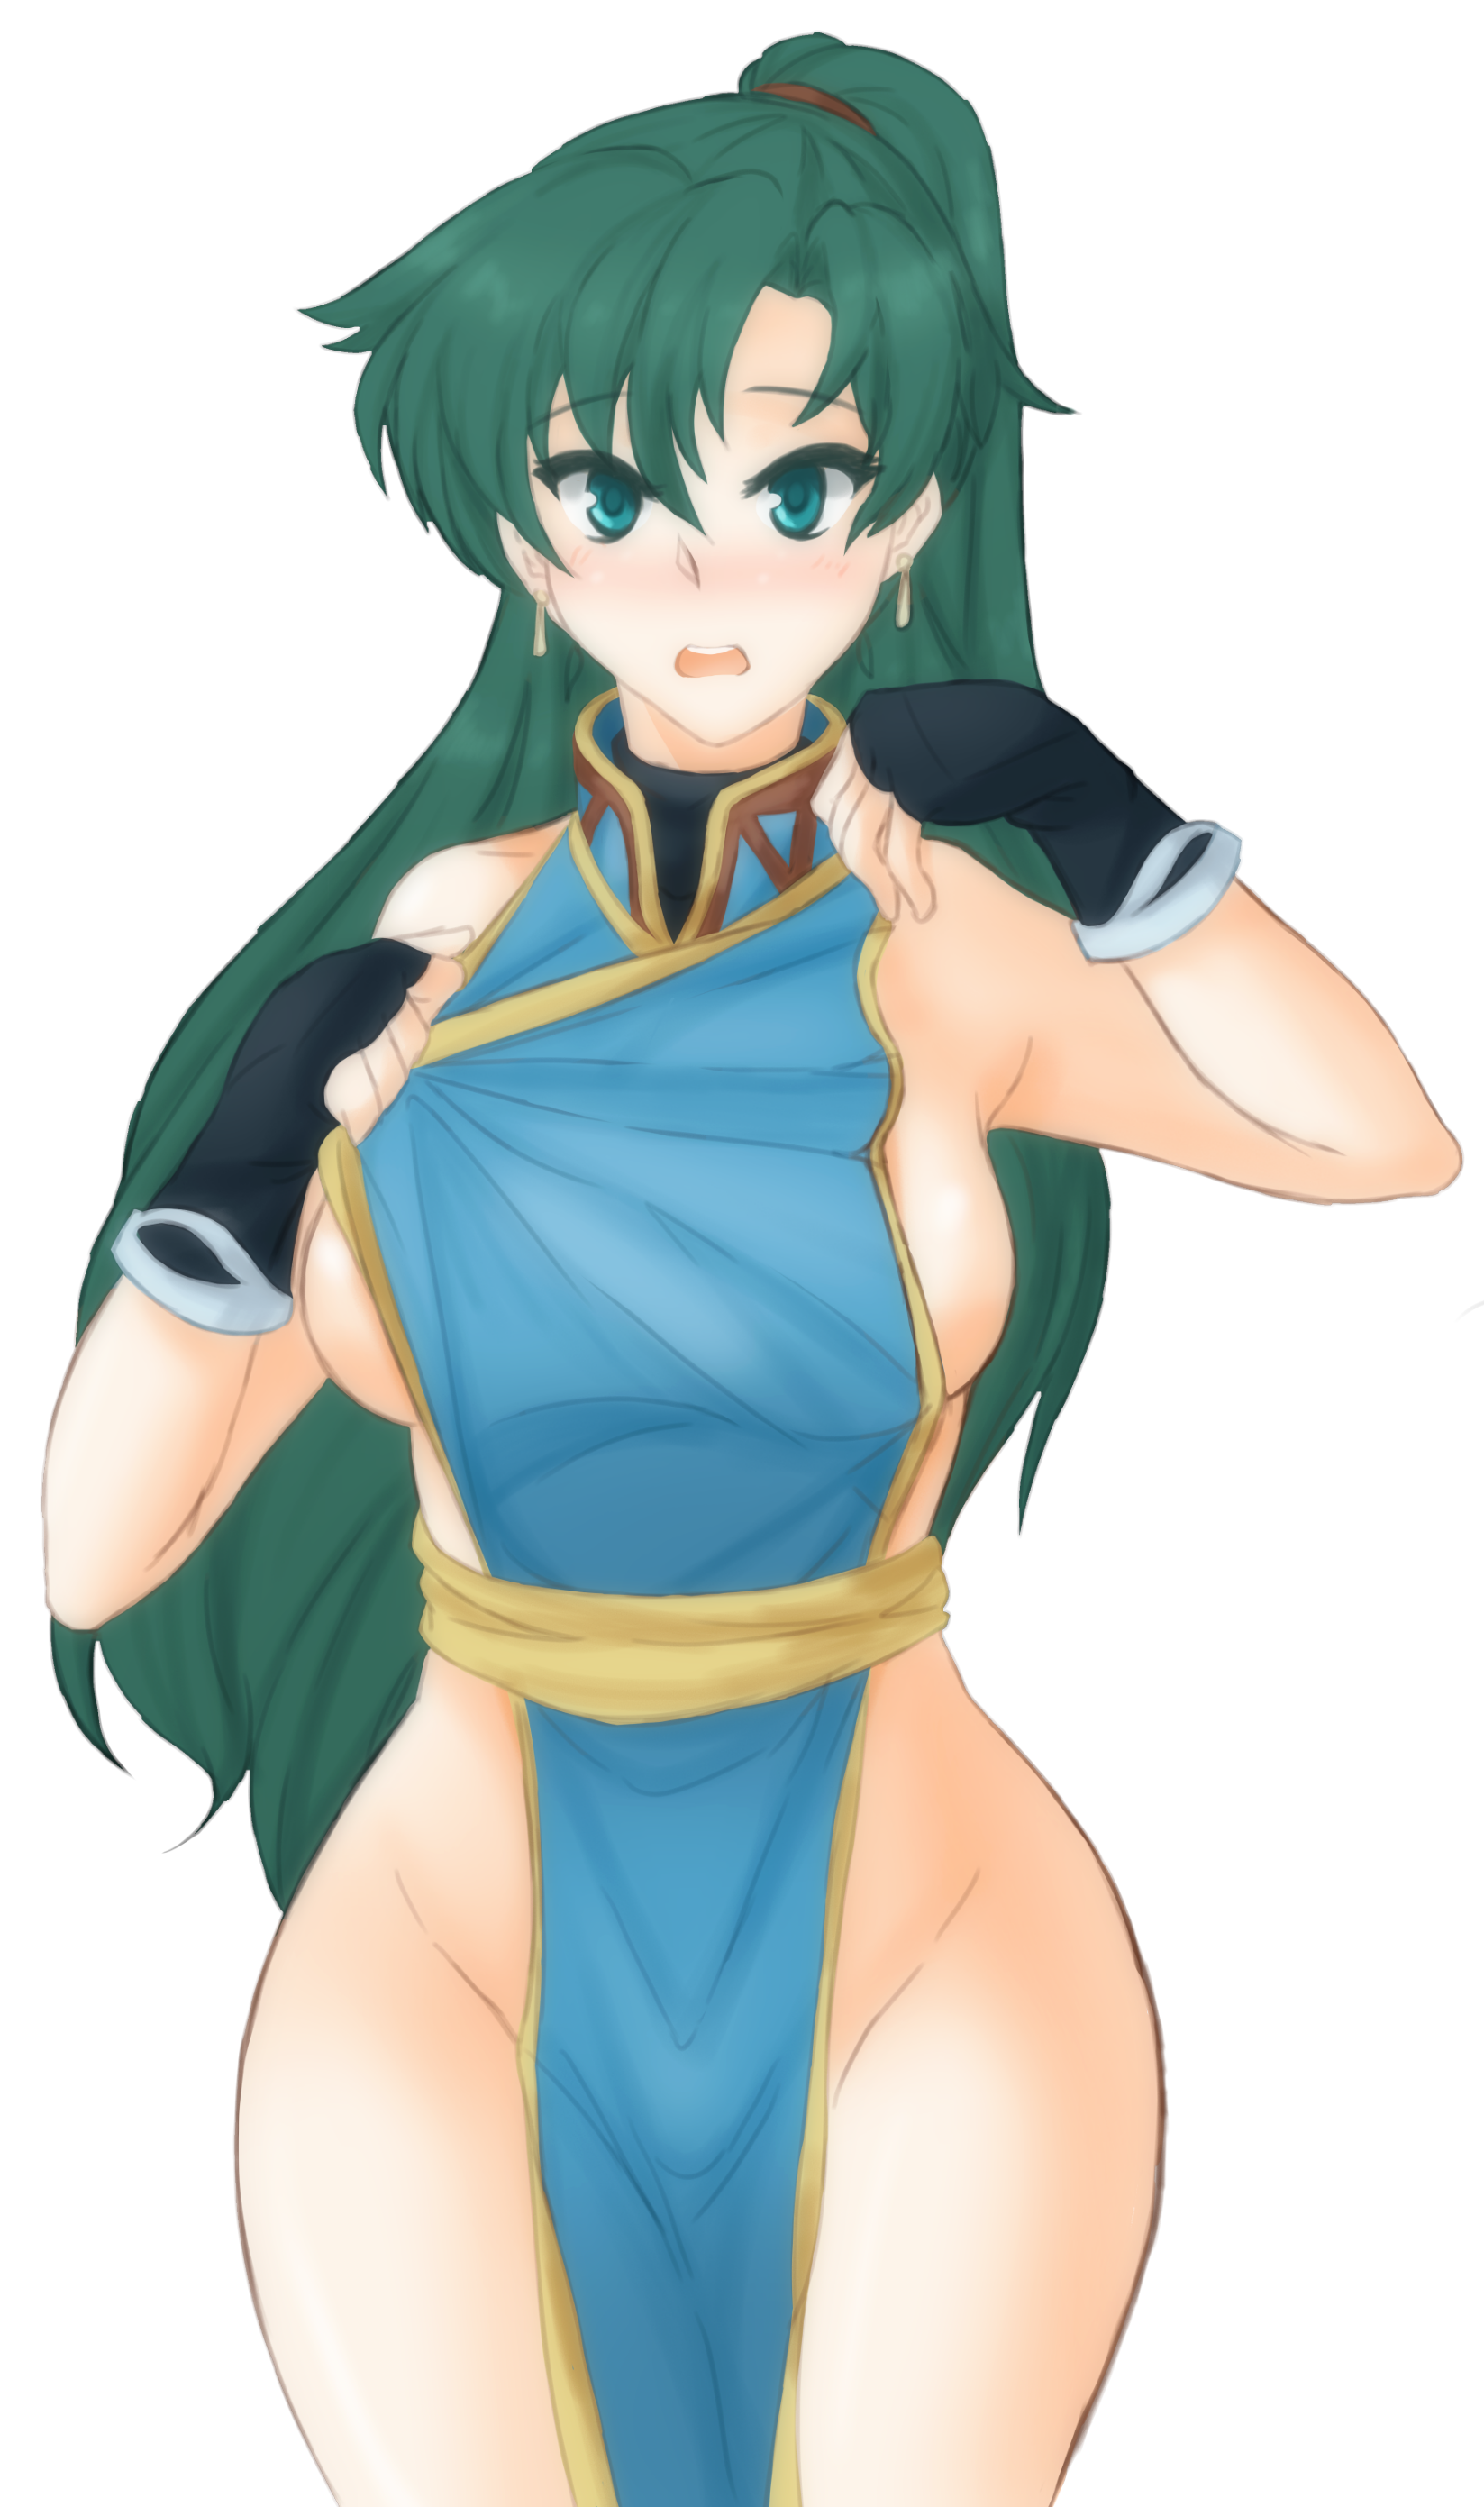 Lyn's new outfit [Tridisart]